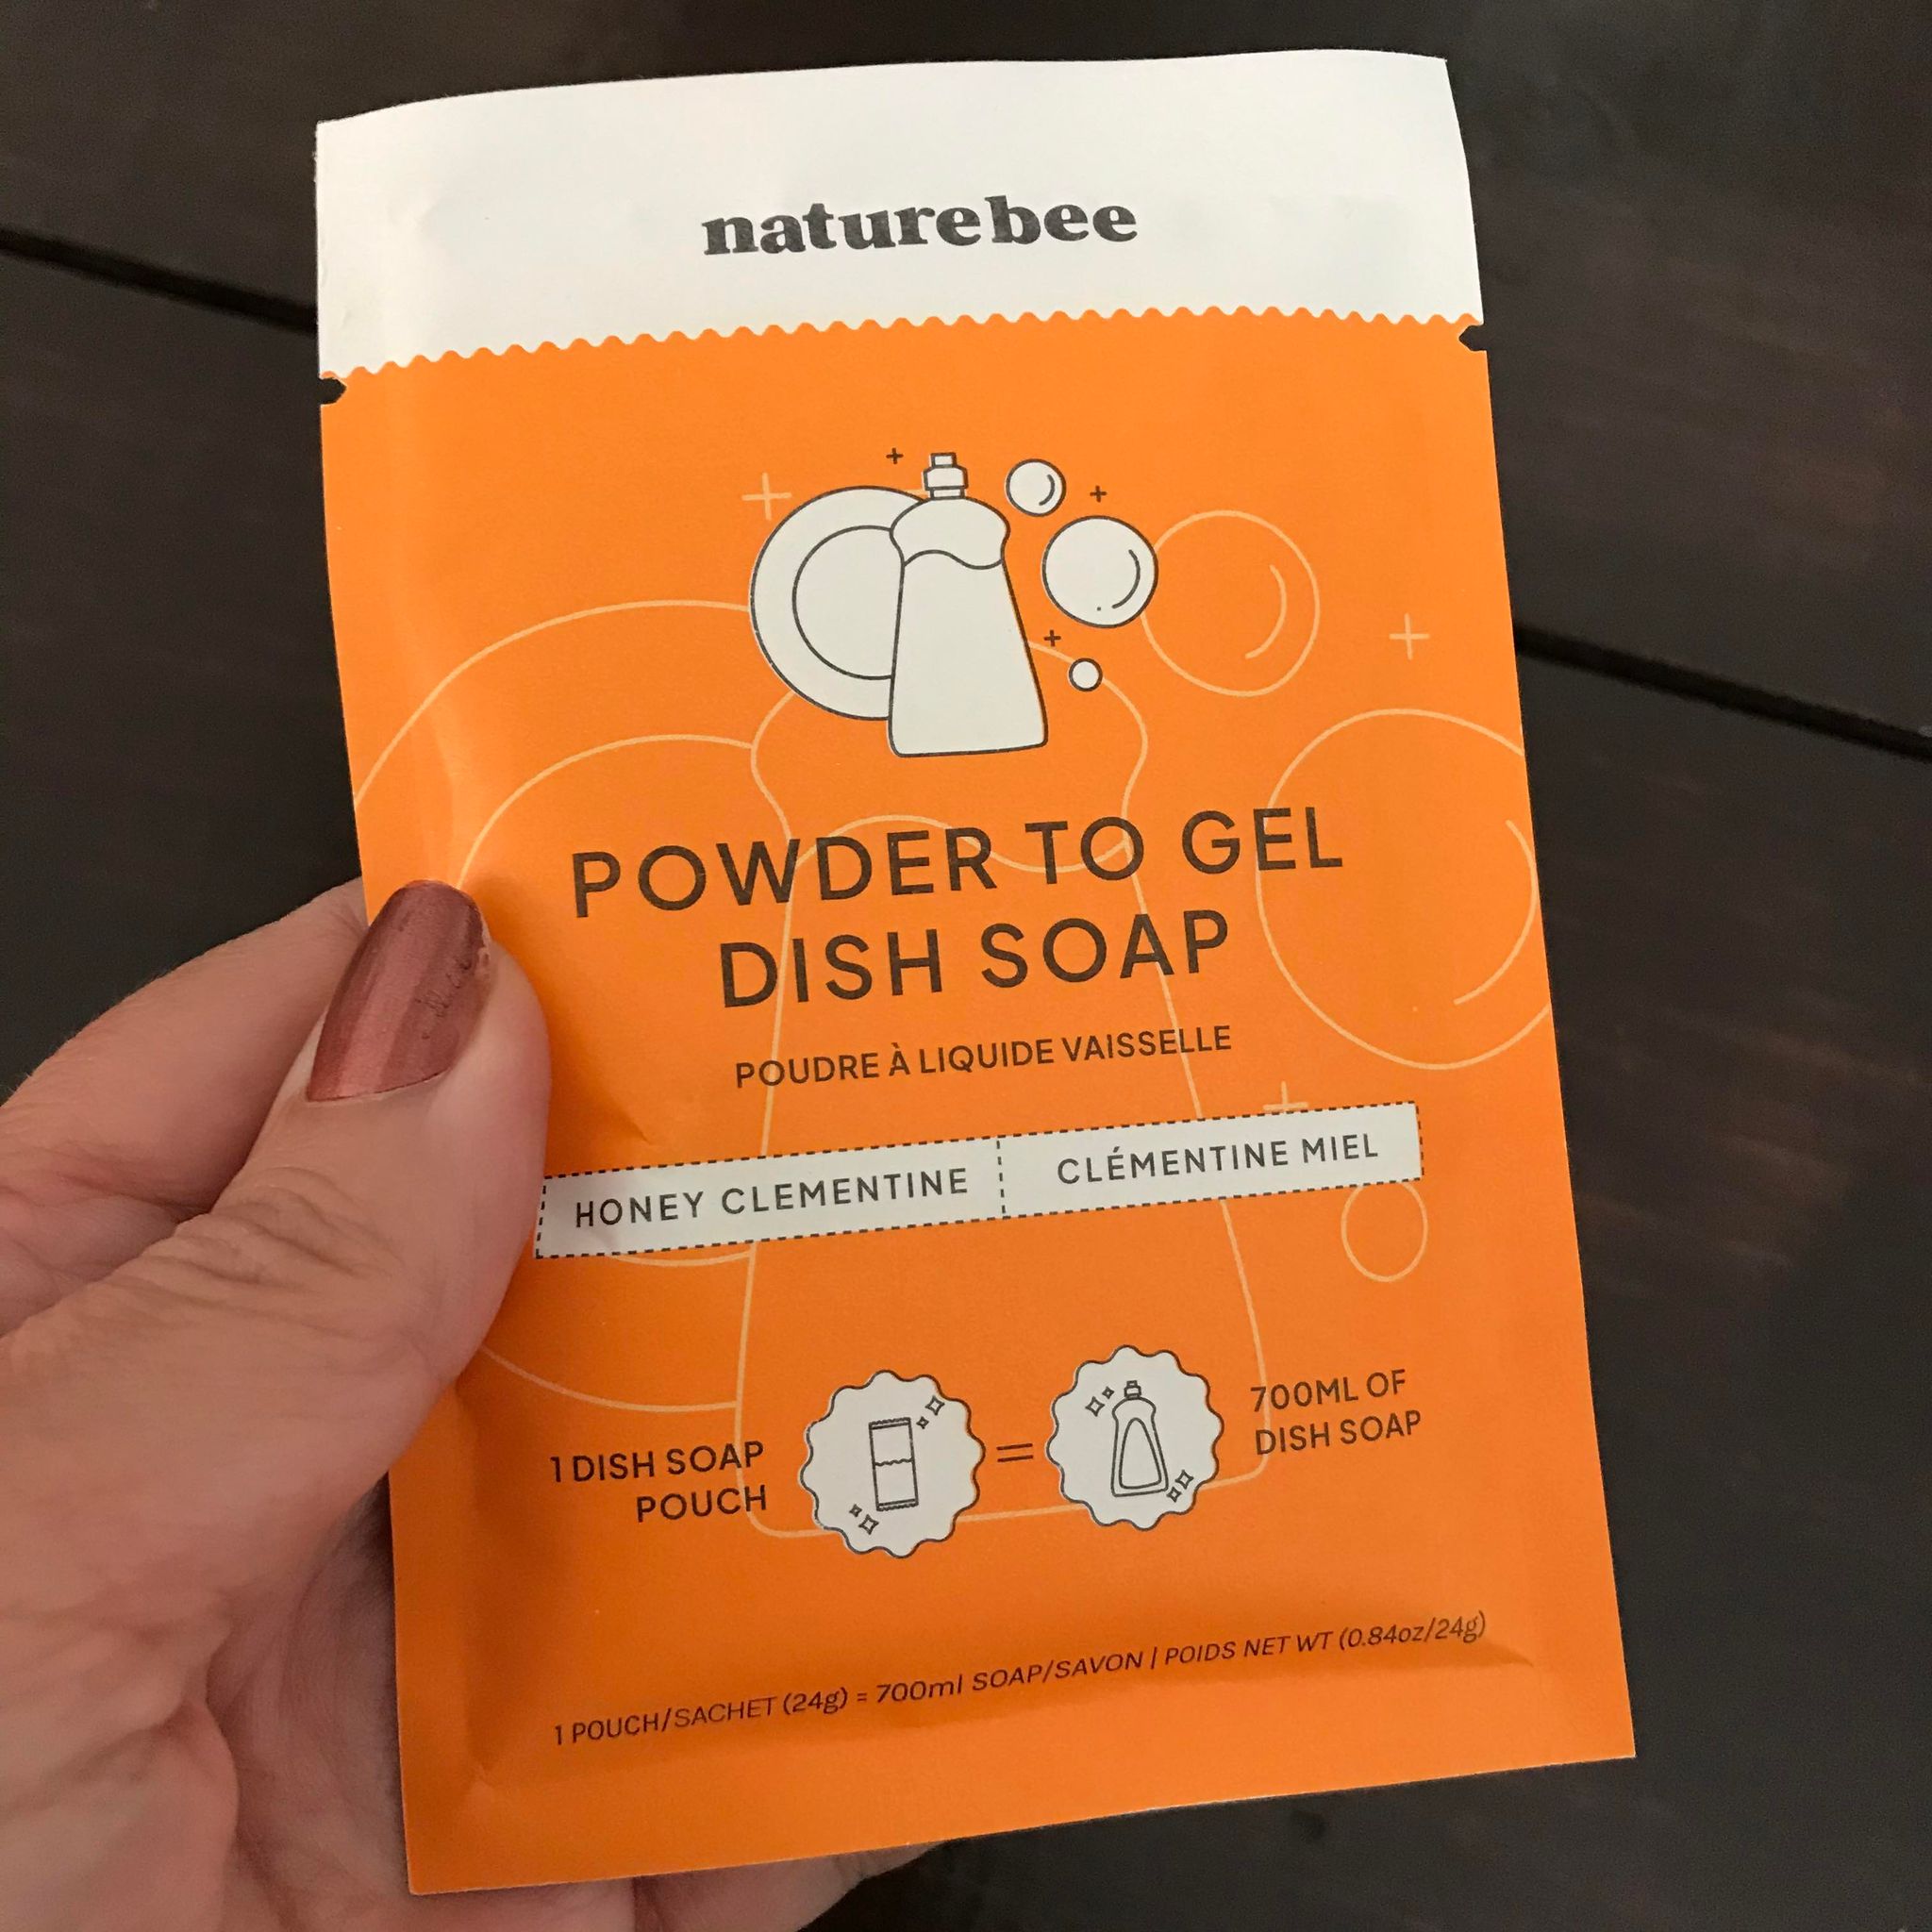 One bag compostable pouch of honey clementine scented powdered dish soap from Nature Bee makes 700 ml of gel dish soap when you add water.